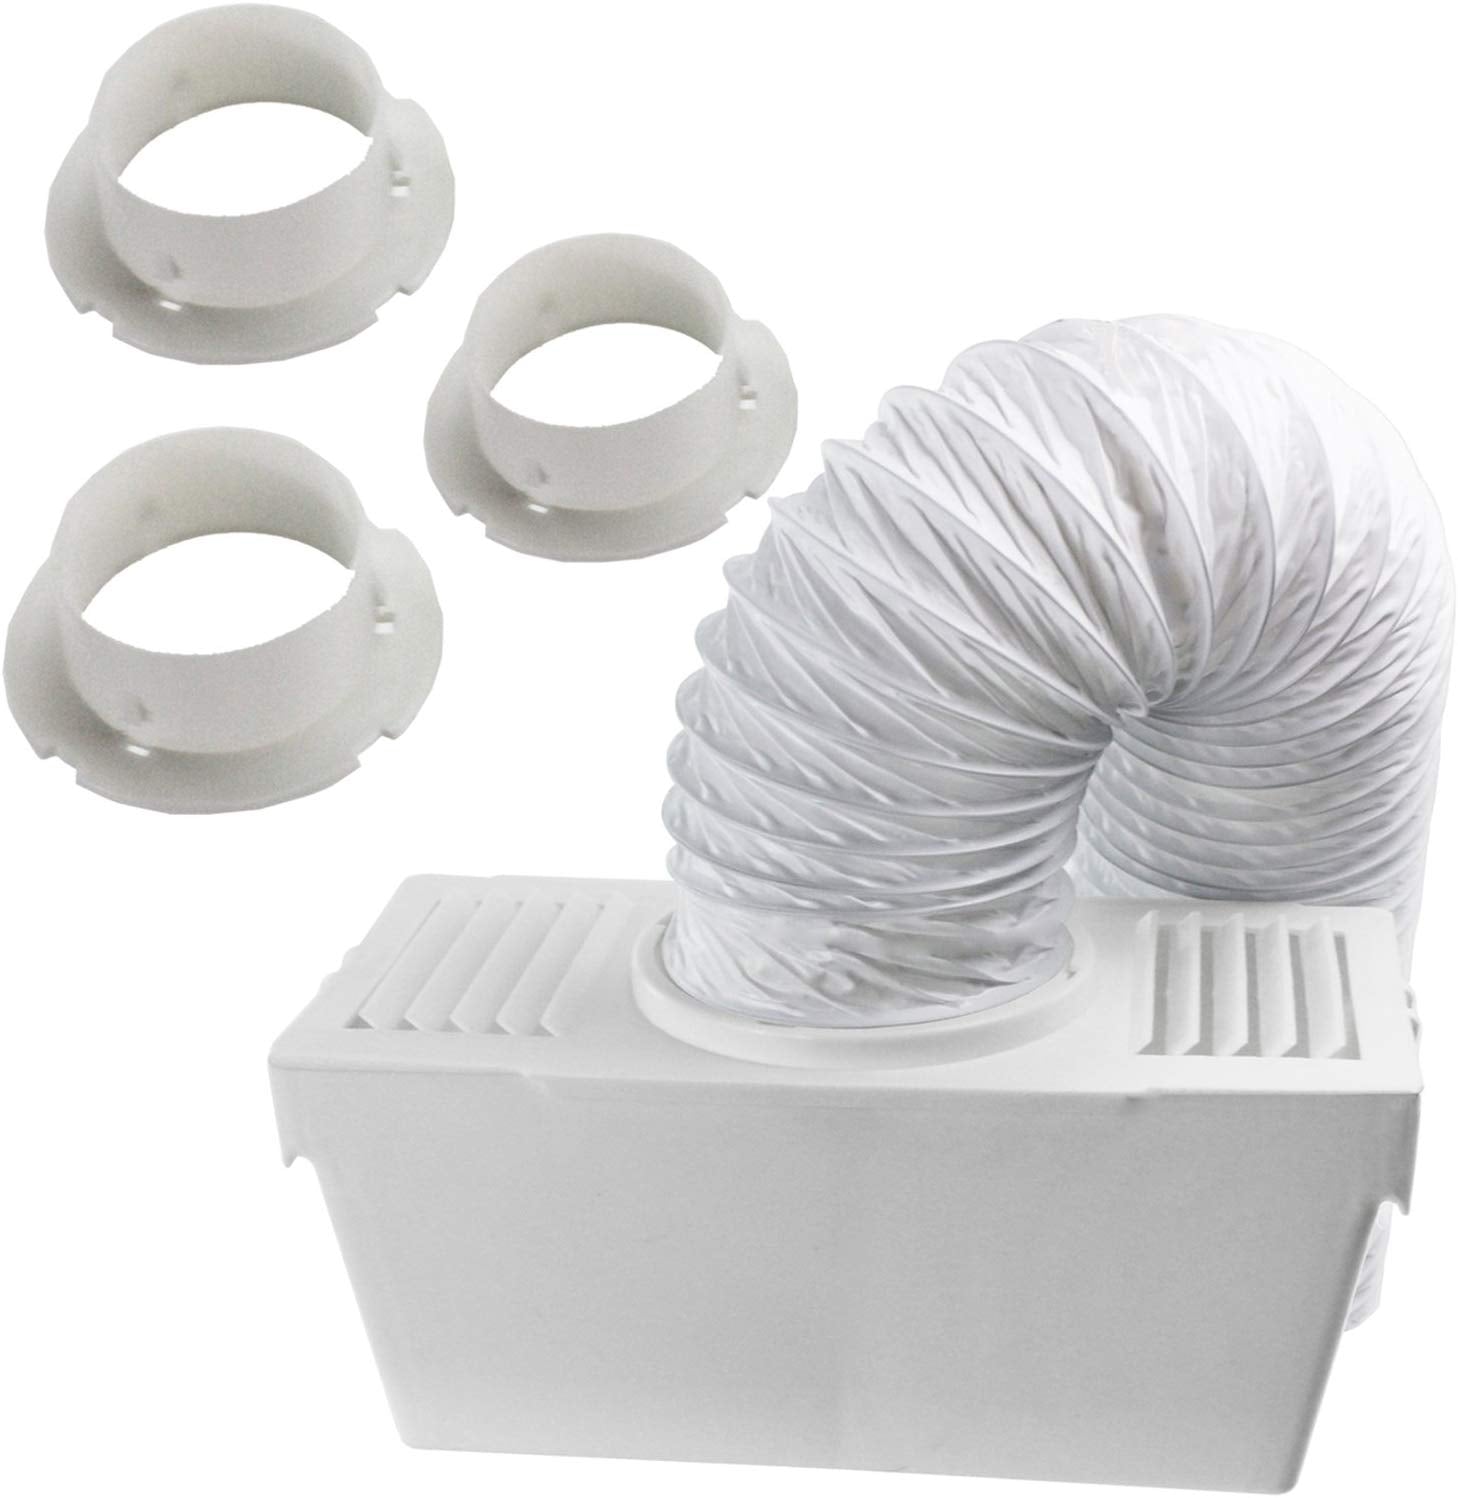 Vent Hose Condenser Kit with 3 x Adapters for Bosch Tumble Dryer (1.2m)